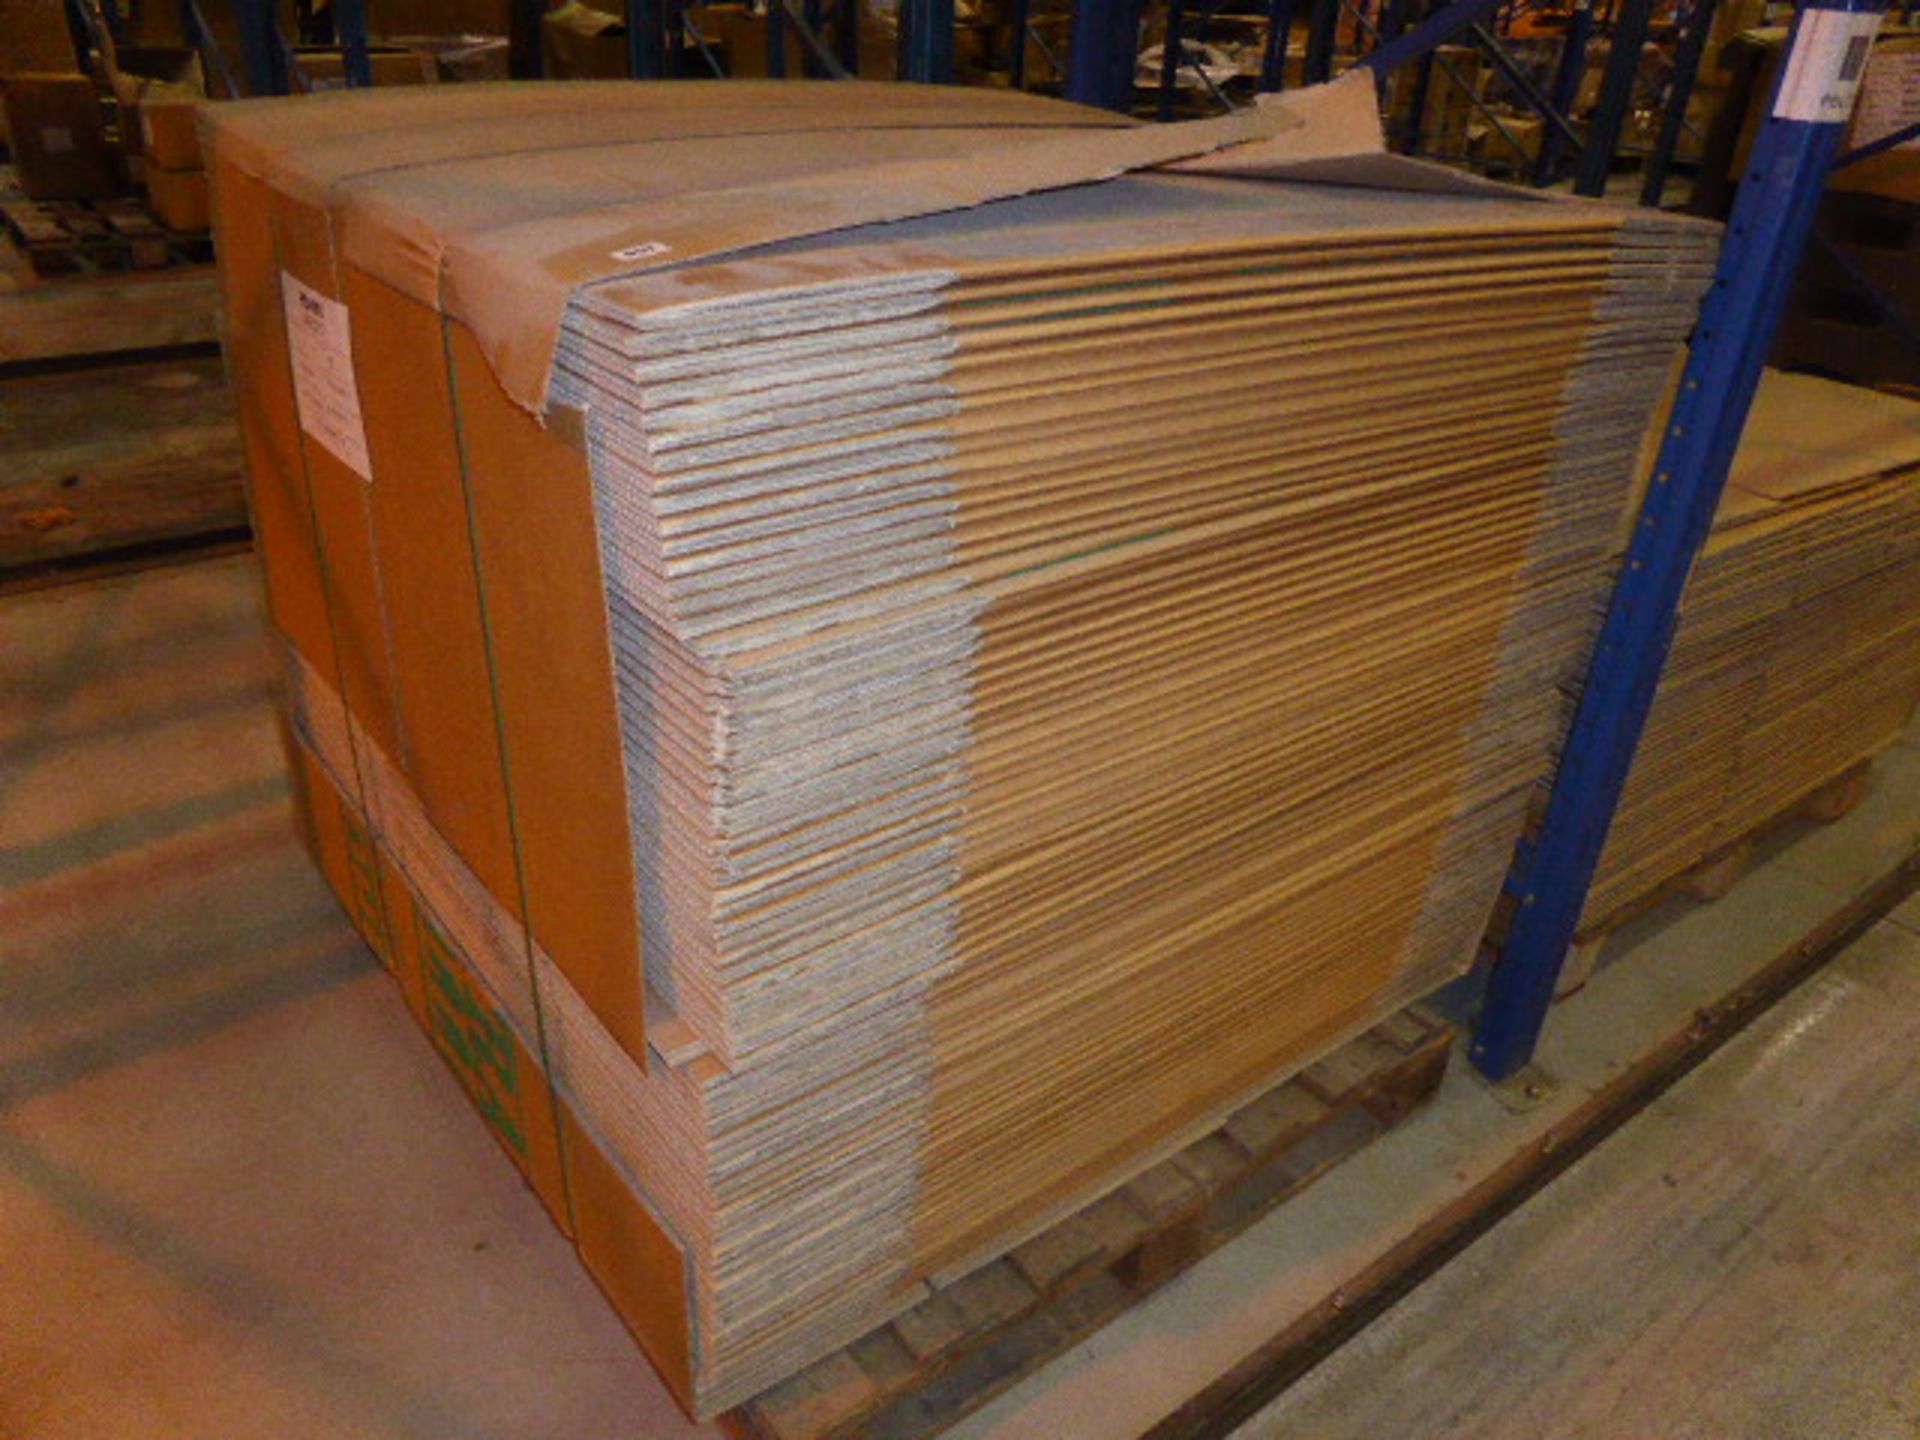 Pallet of 75 670mm x 400mm x 712mm cardboard boxes